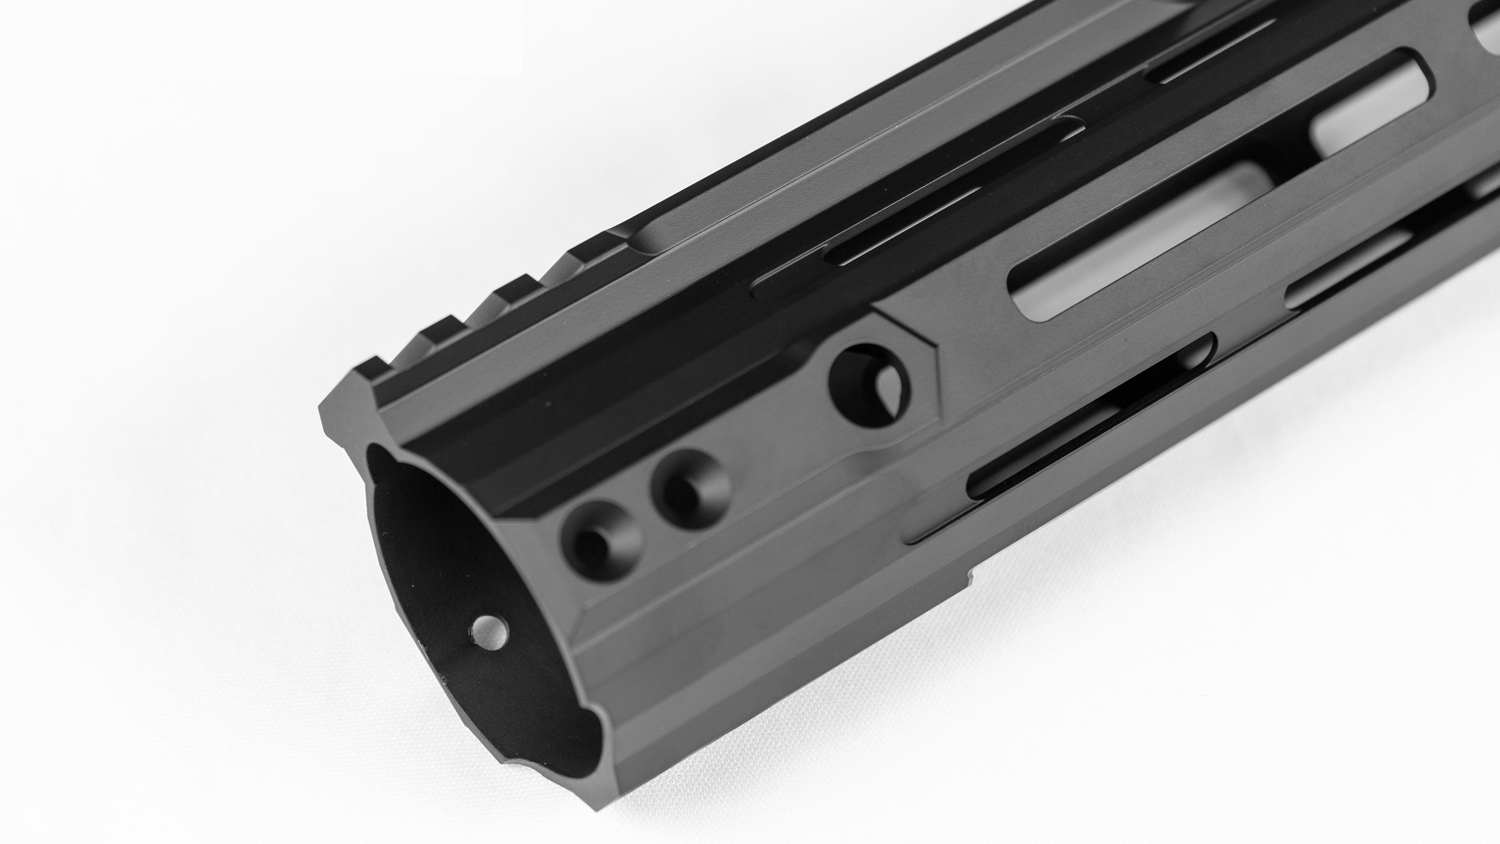 Extra rail length where the handguard meets the receiver